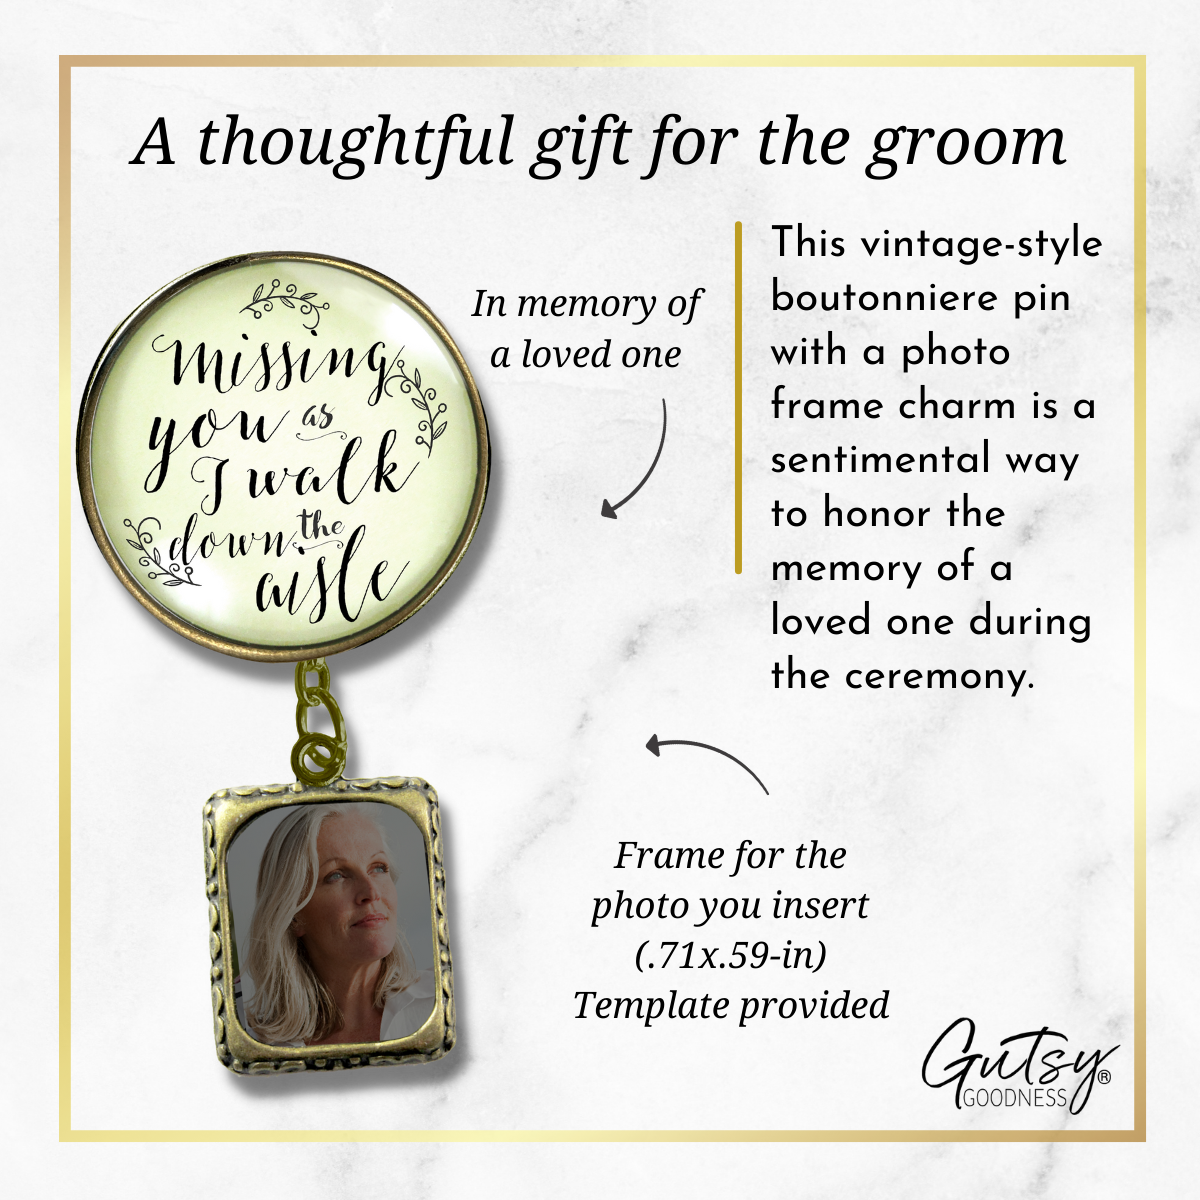 Wedding Memorial Boutonniere Pin Photo Frame Missing You Today Vintage Cream For Men - Gutsy Goodness